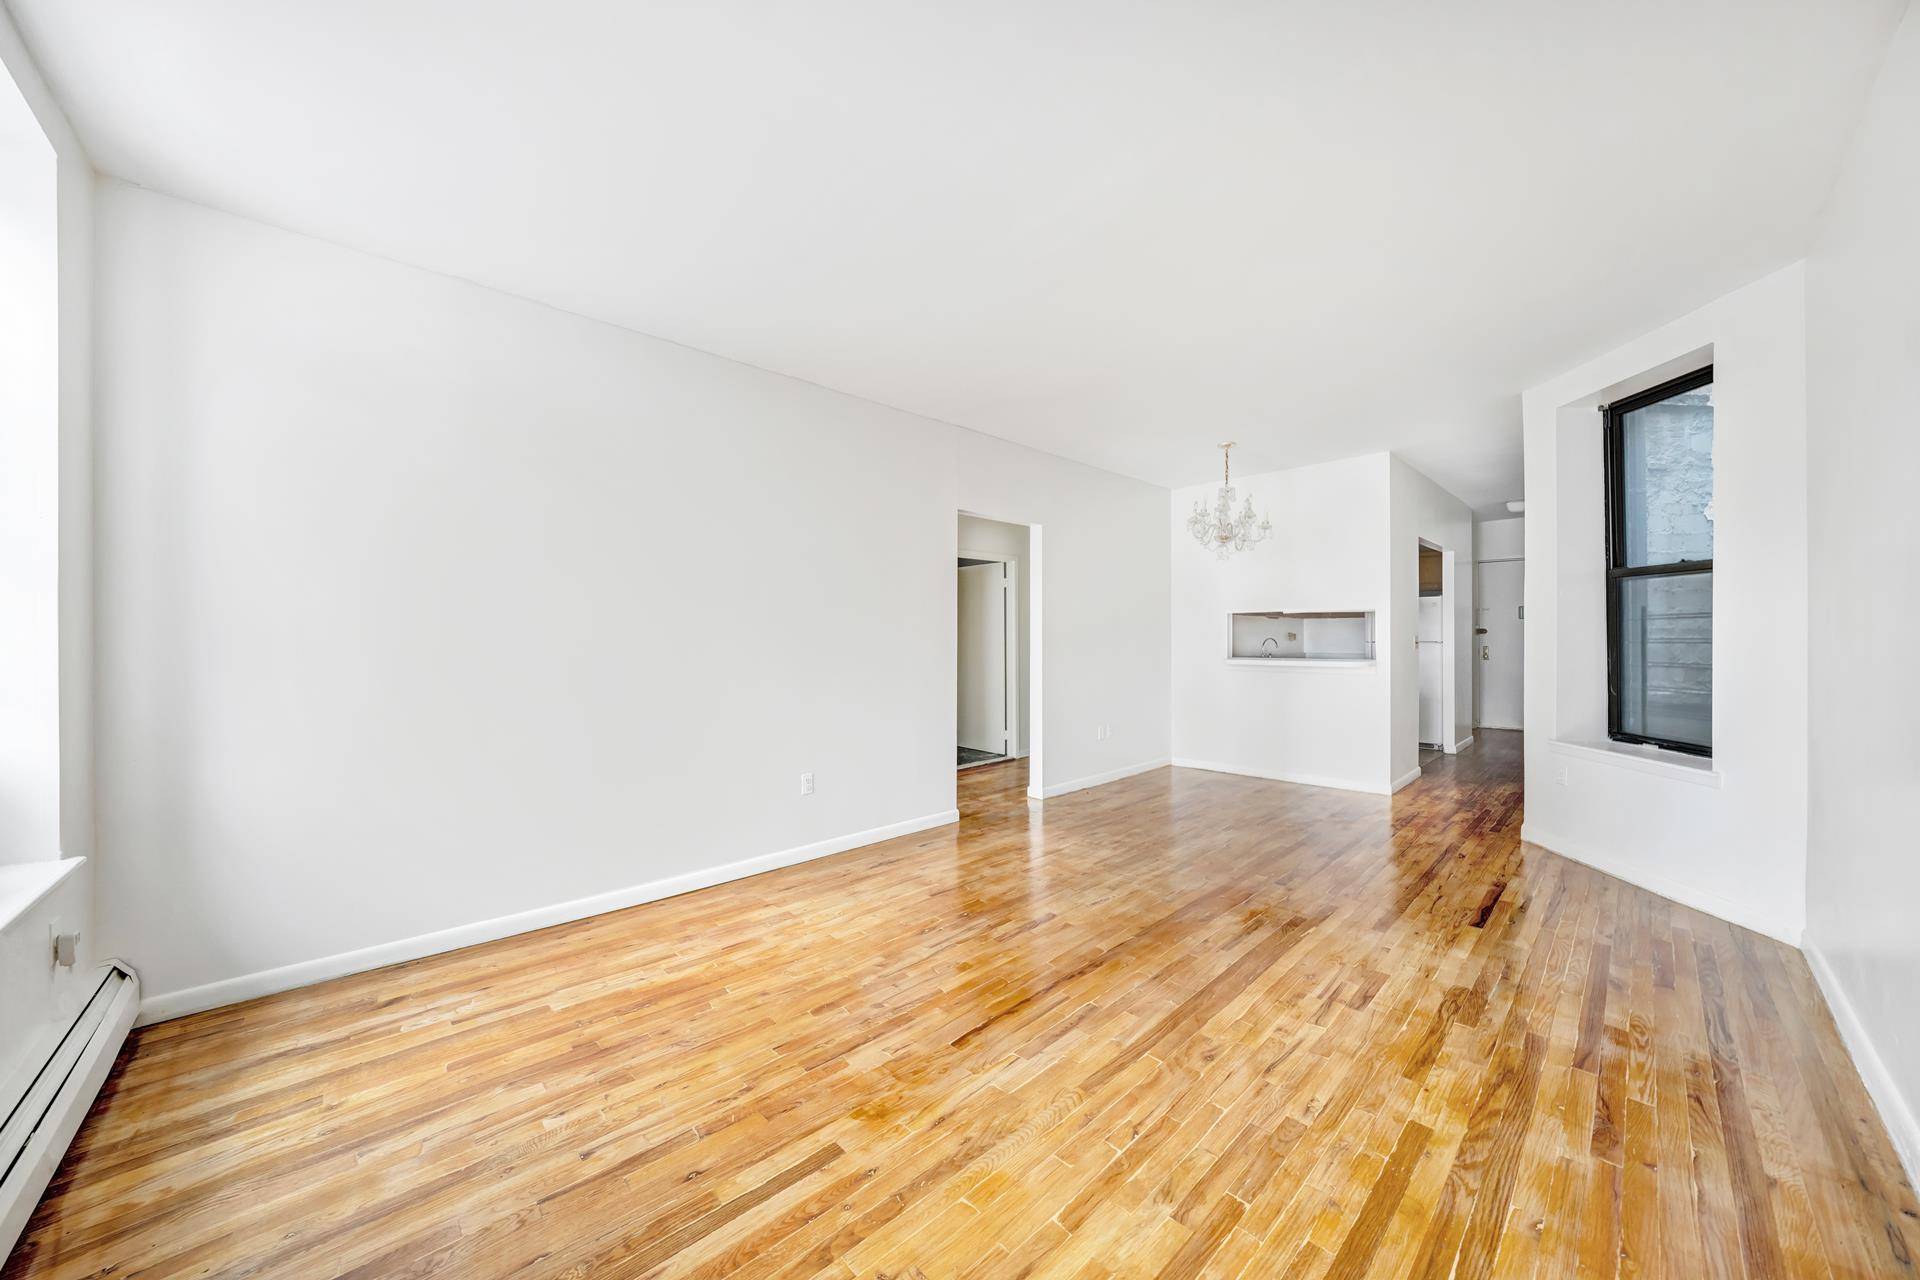 Facing East toward the National Landmarked Strivers Row Townhouses, this 2 bedroom apartment gets great morning light and has rooms of generous proportions.